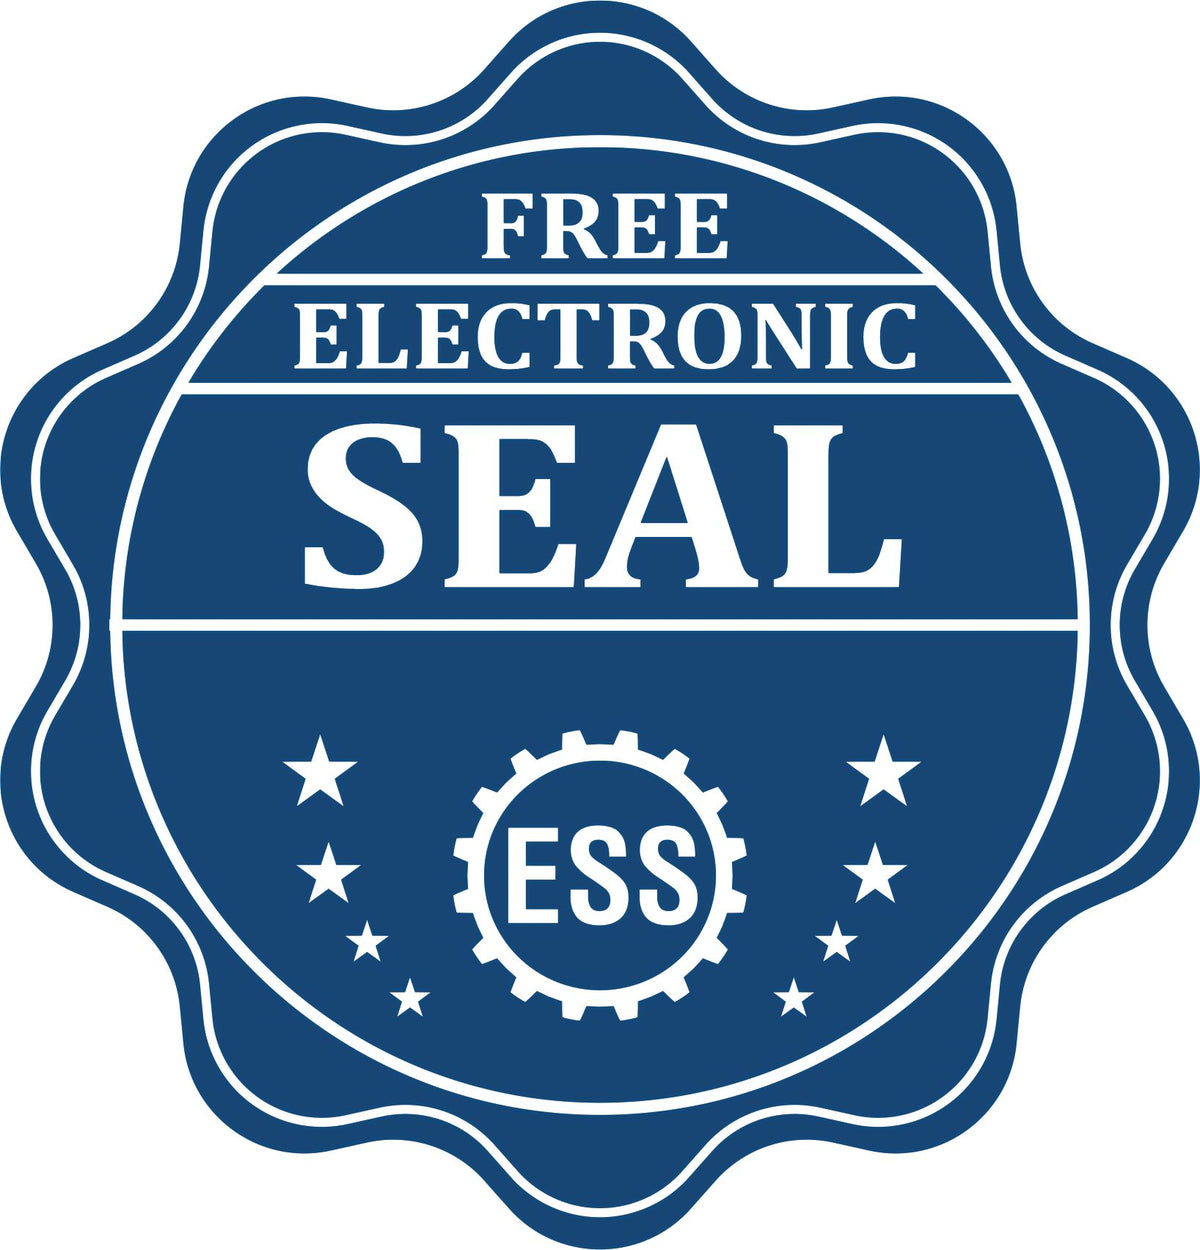 A badge showing a free electronic seal for the Heavy Duty Cast Iron Nebraska Land Surveyor Seal Embosser with stars and the ESS gear on the emblem.